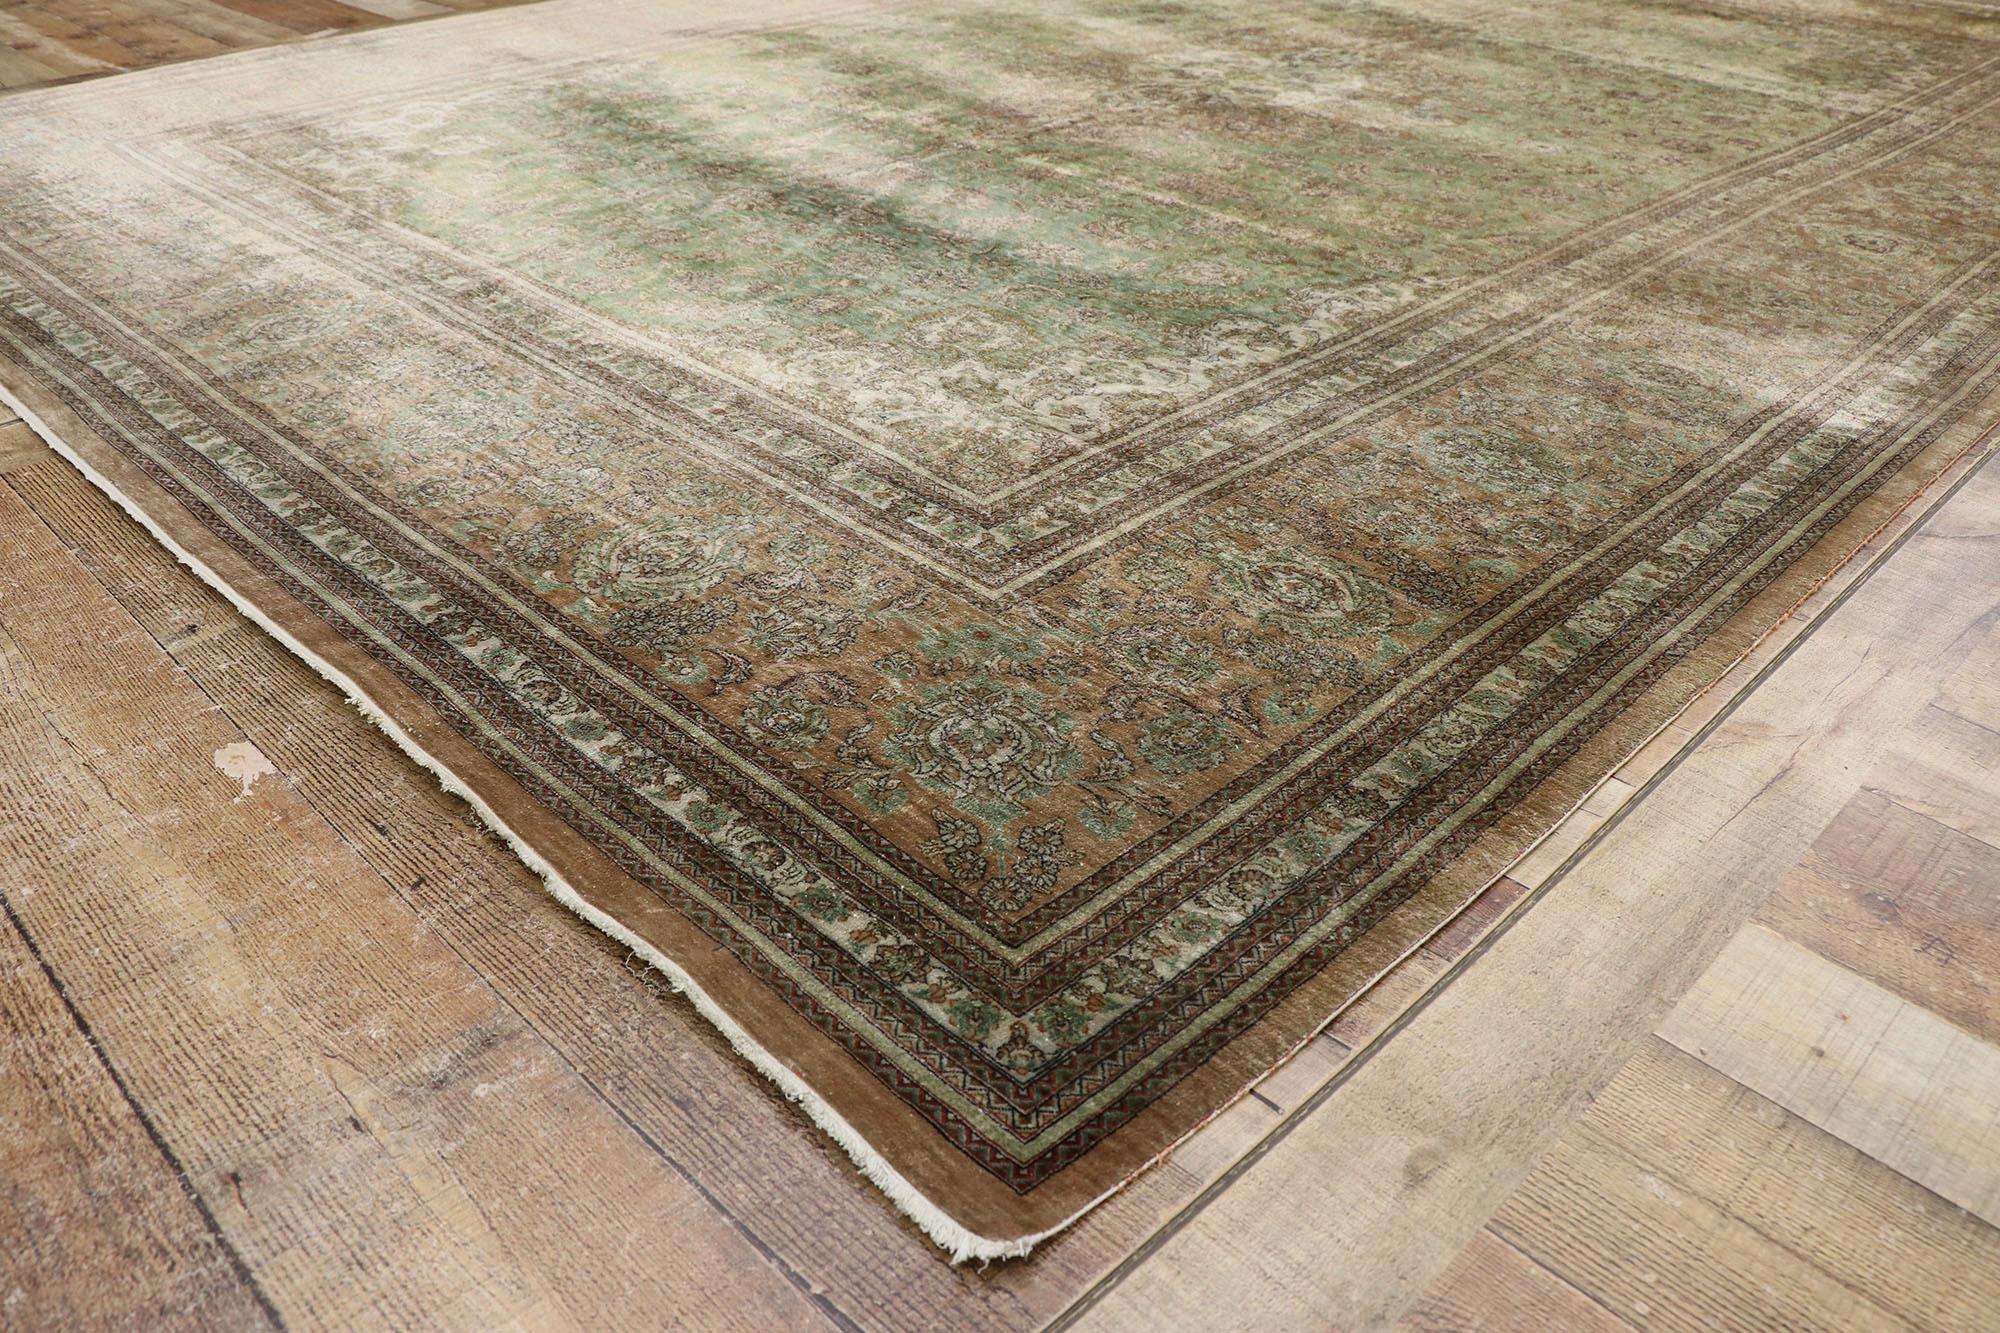 Vintage Persian Silk Qum Rug with Warm Earth-Tone Colors 1